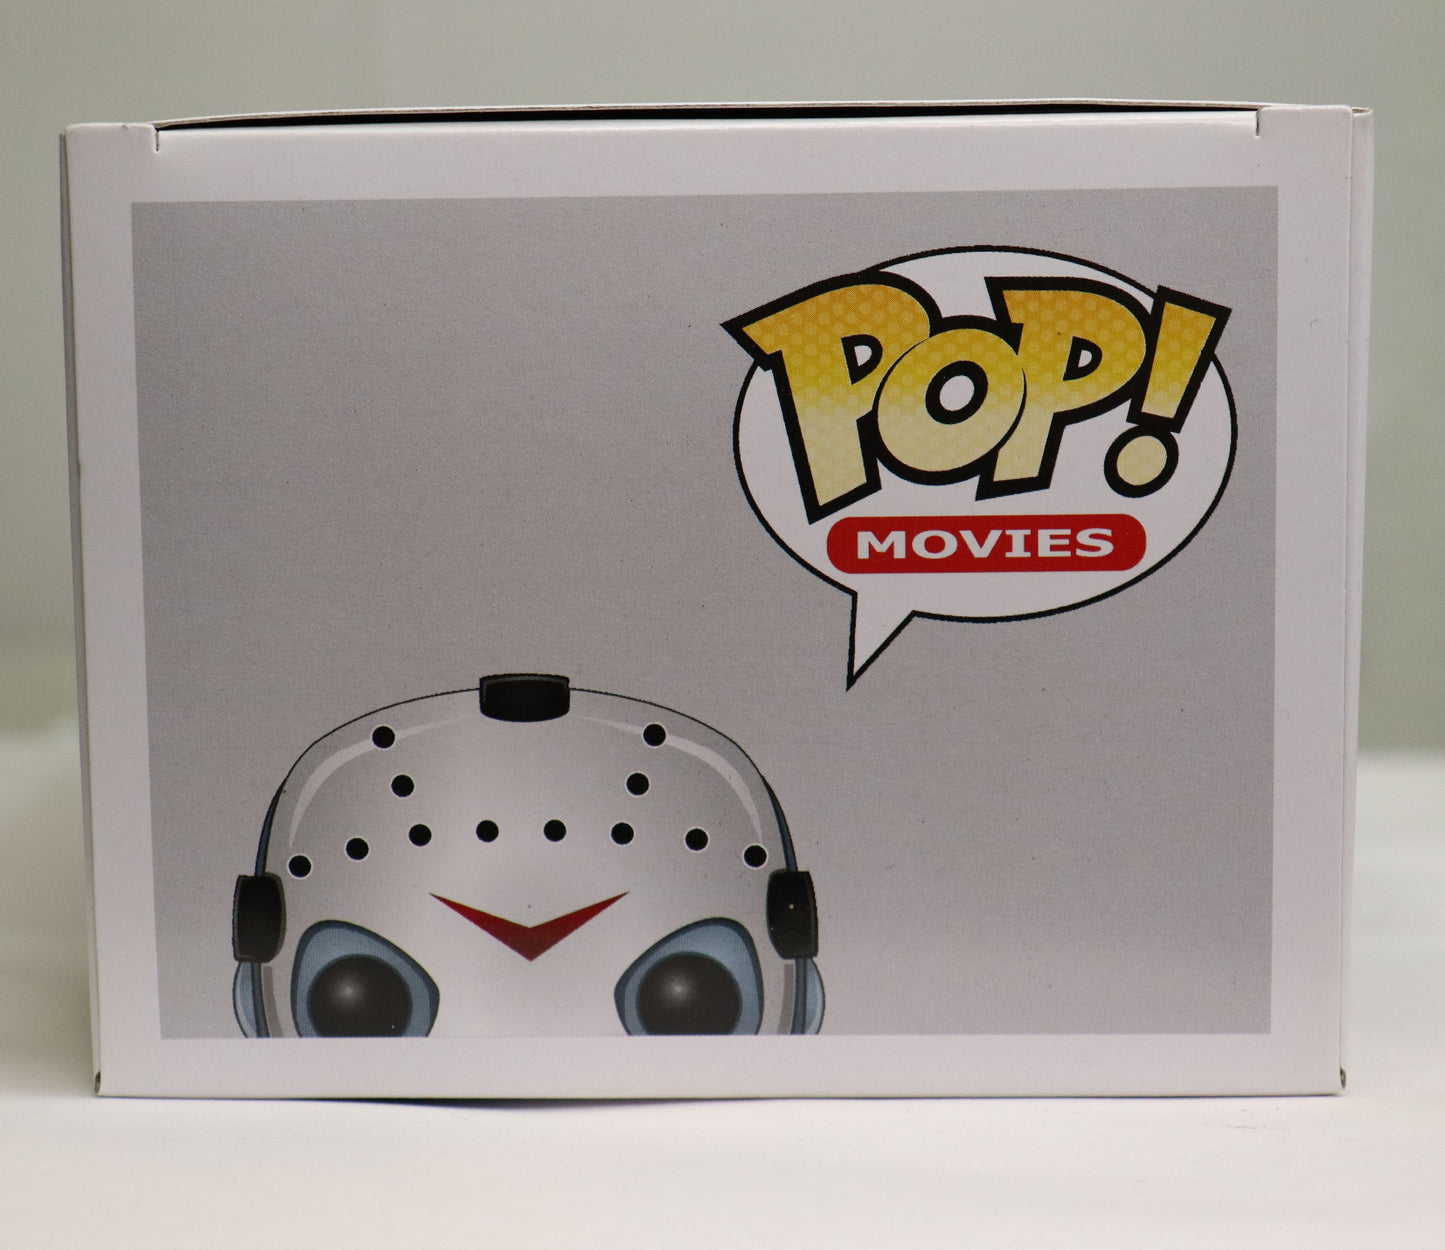 Jason Voorhees POP! (Friday the 13th) 01 Glow Chase